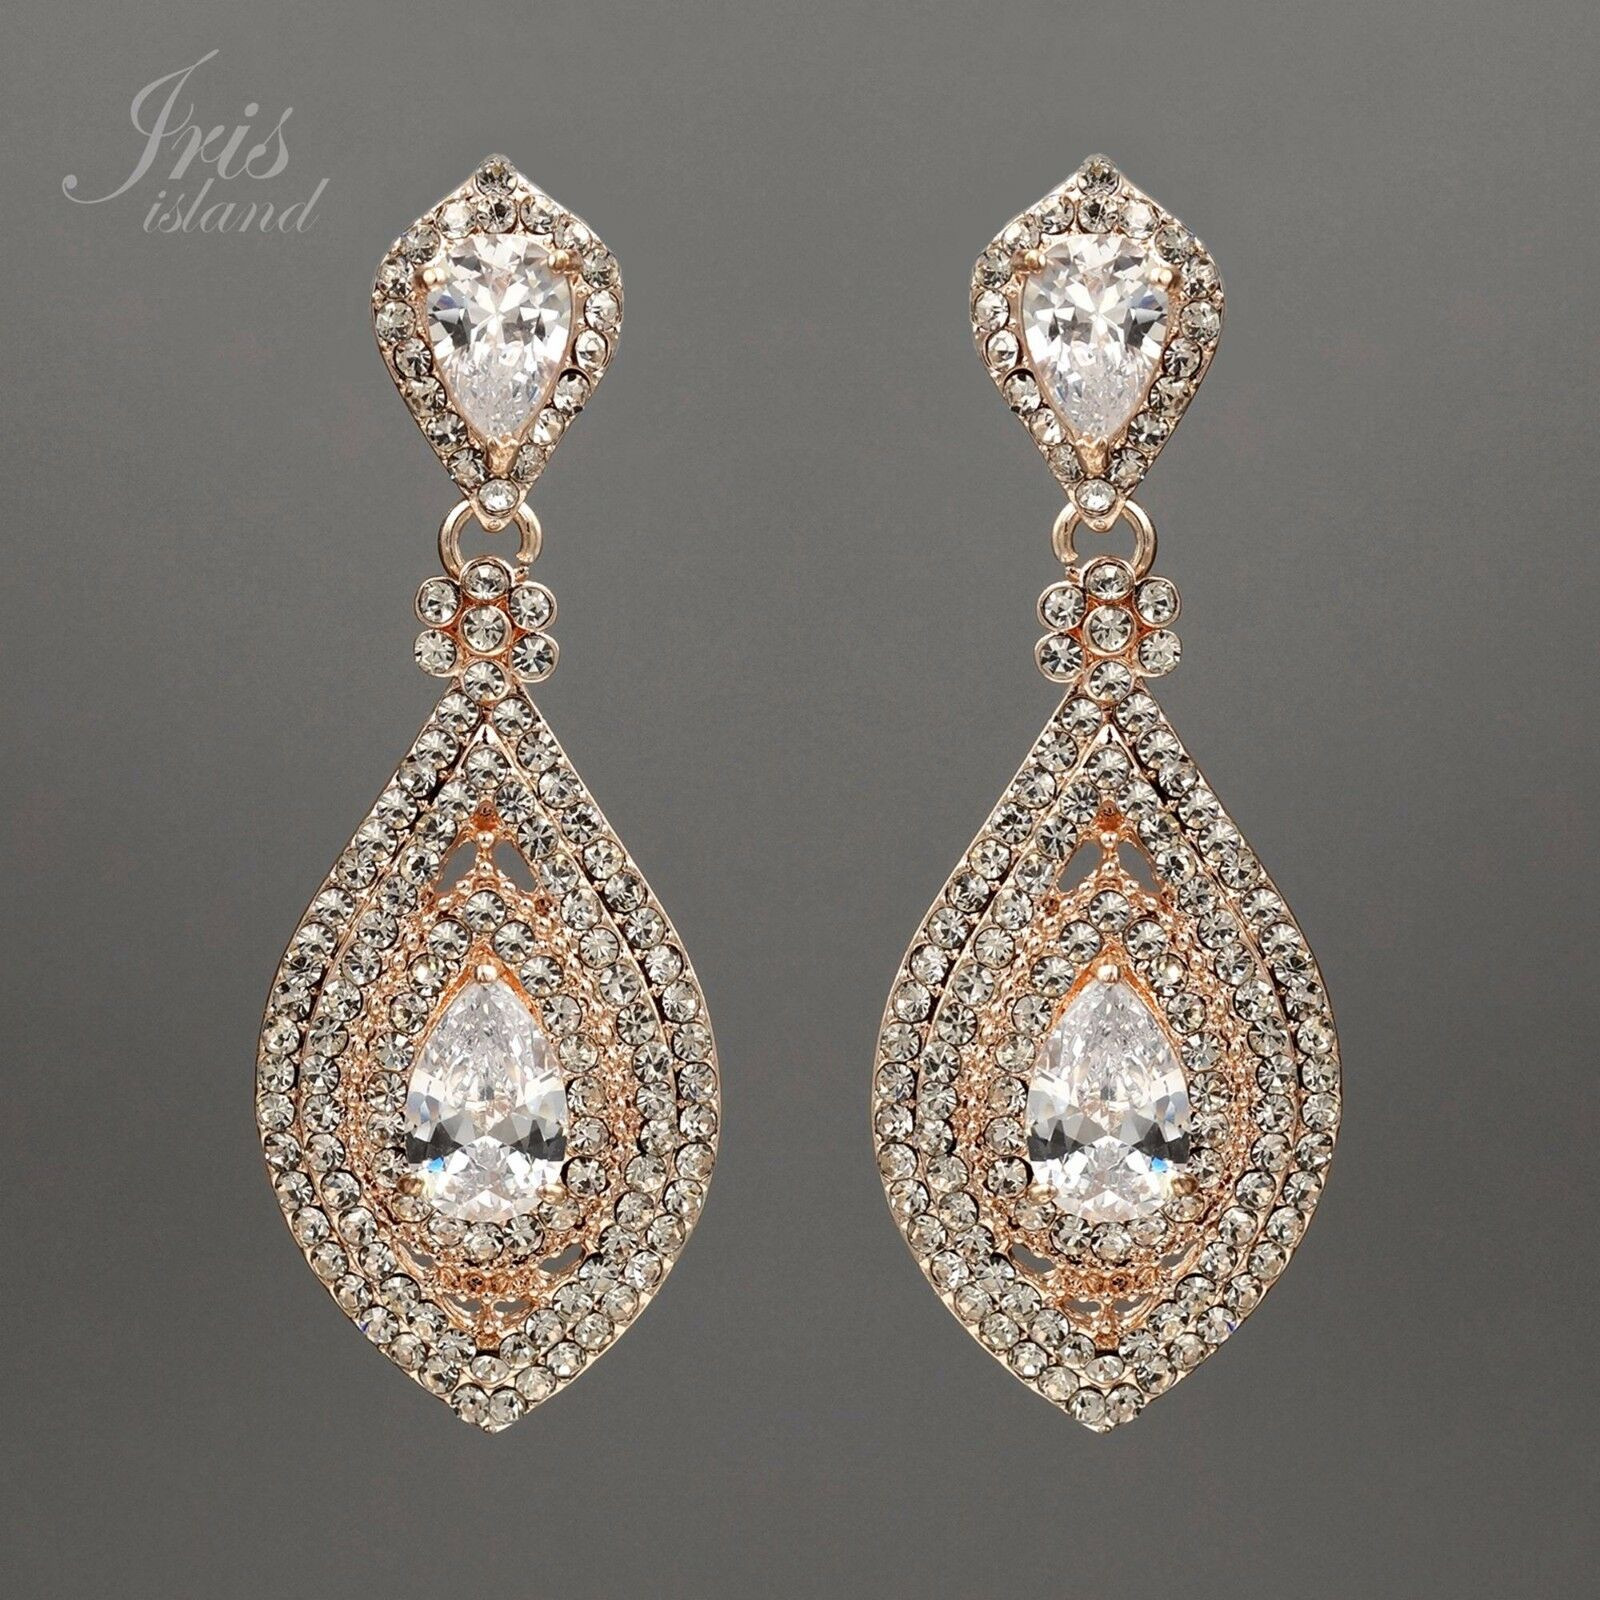 Rose Gold Chandelier Earrings
 ROSE GOLD Plated Clear Crystal Rhinestone CZ Bridal Drop